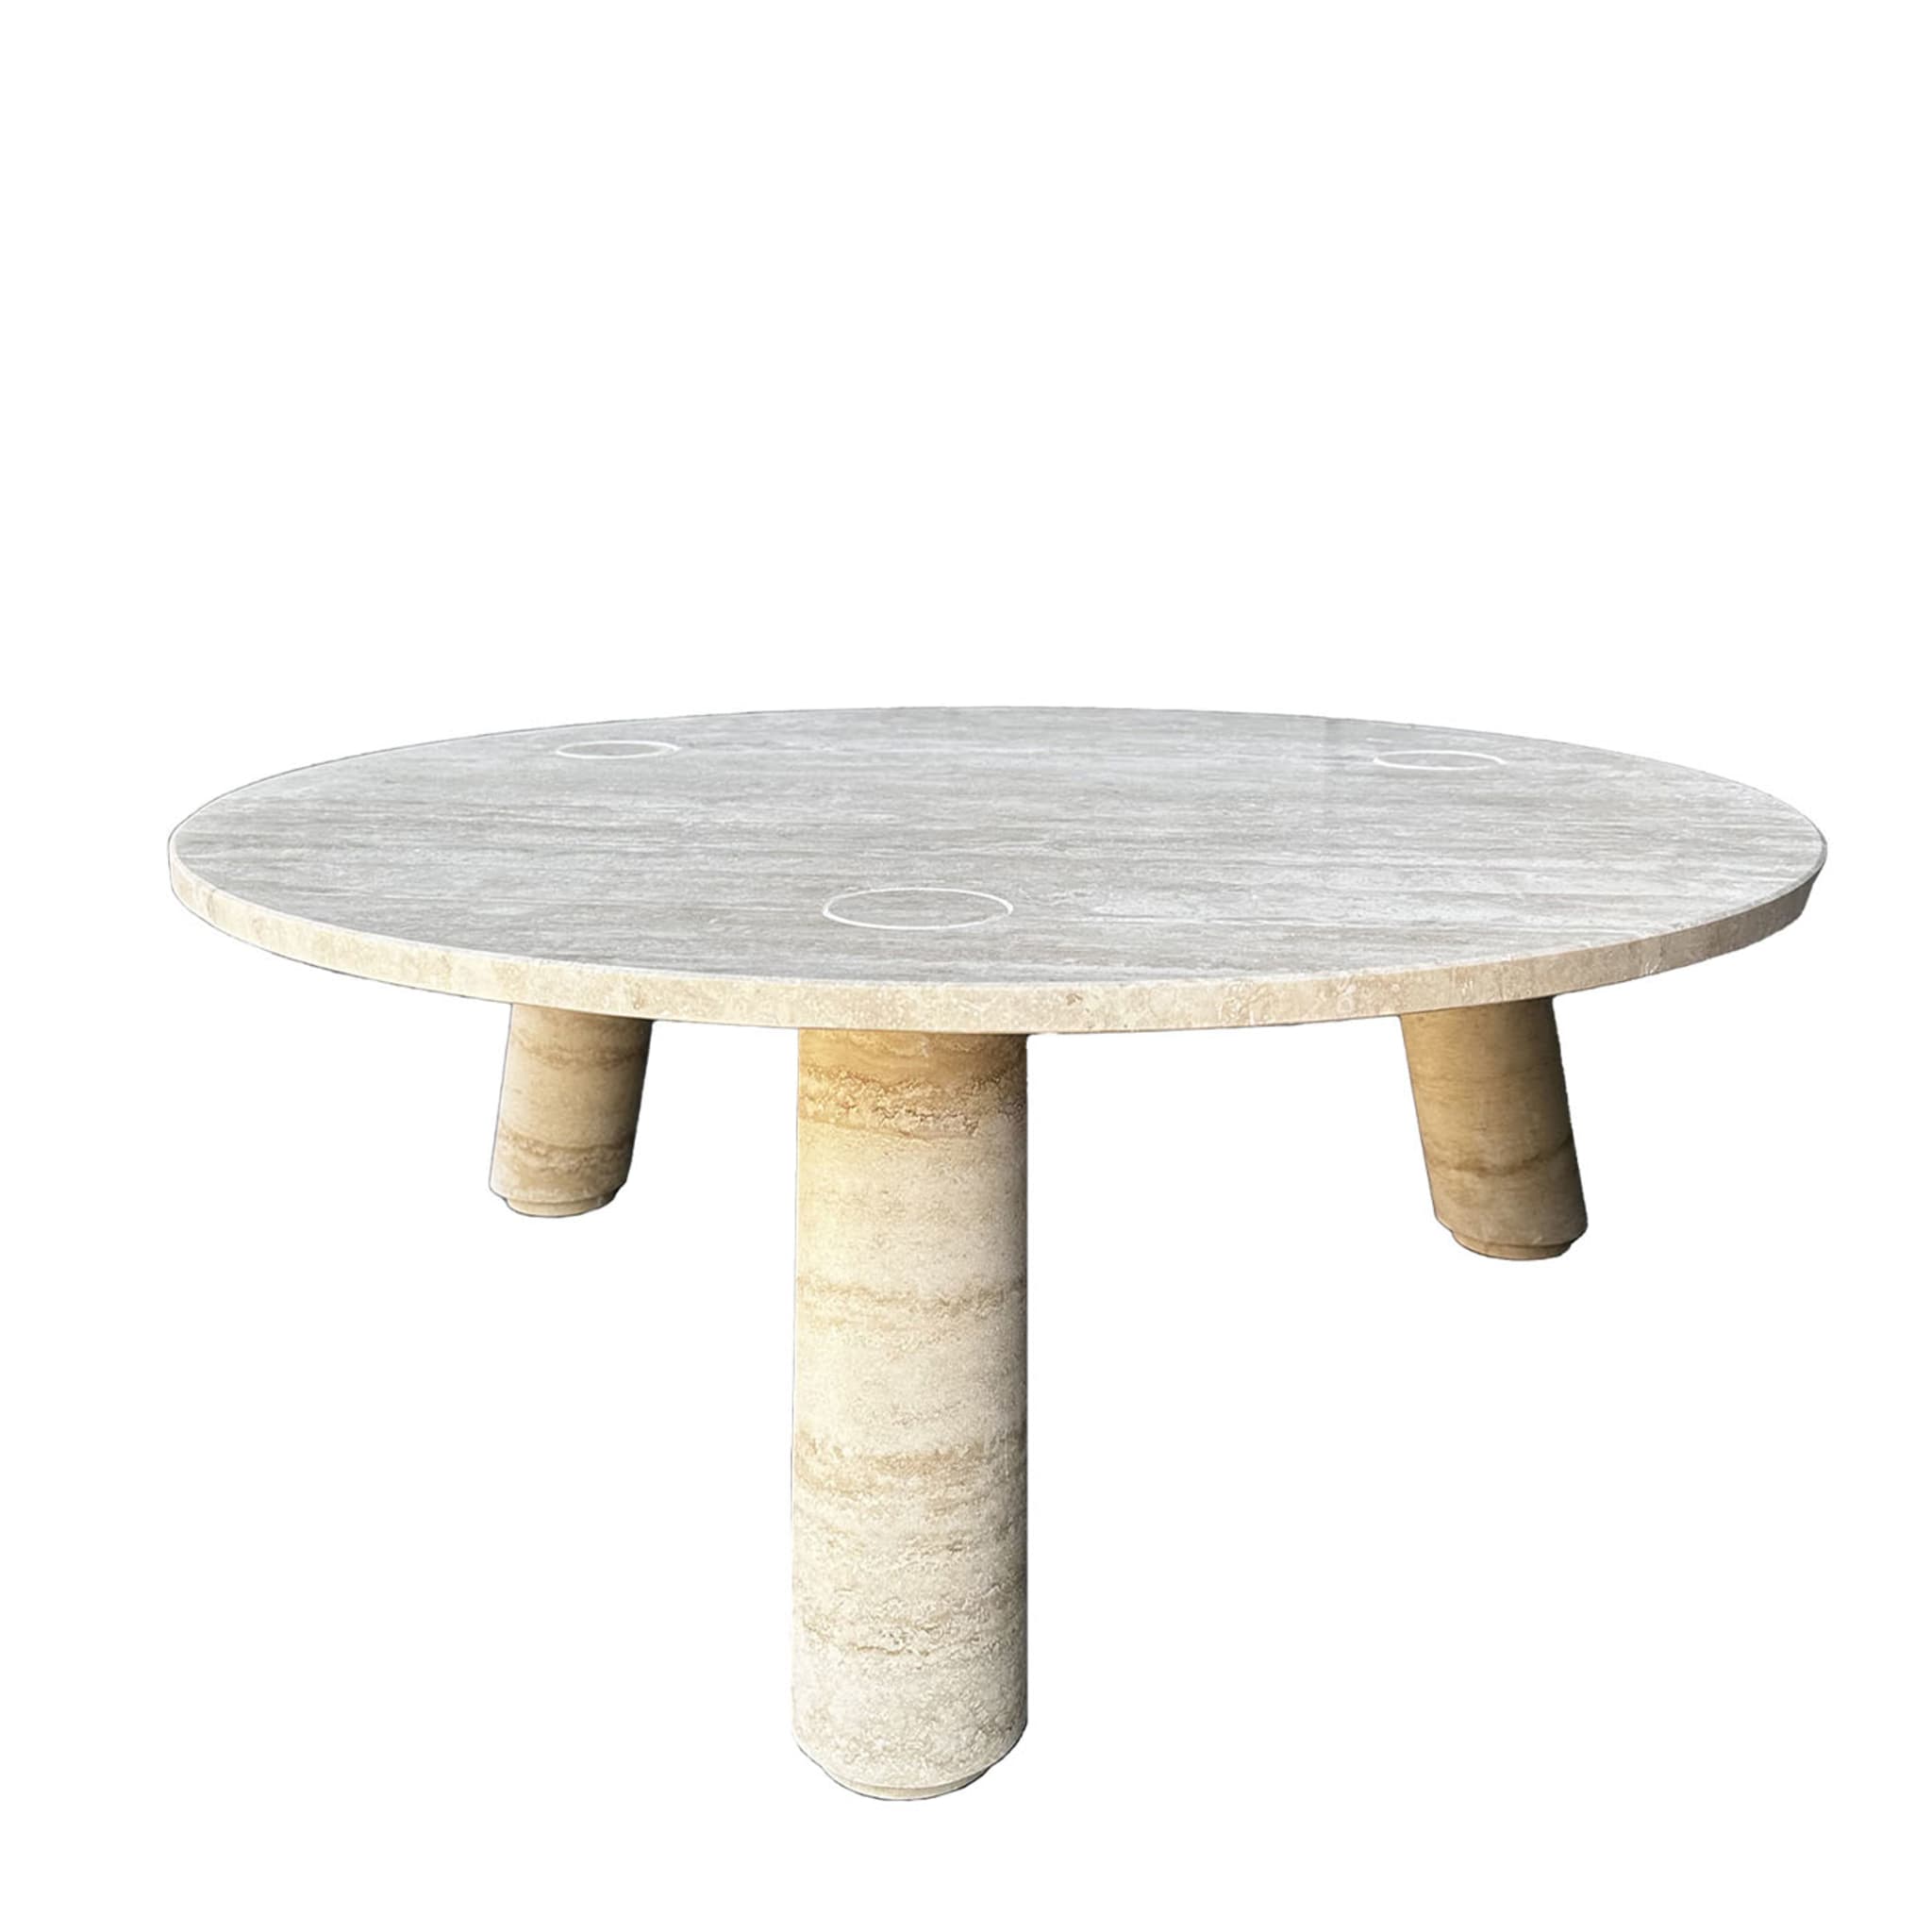 Low Table in Travertine Romano Marble - Alternative view 1